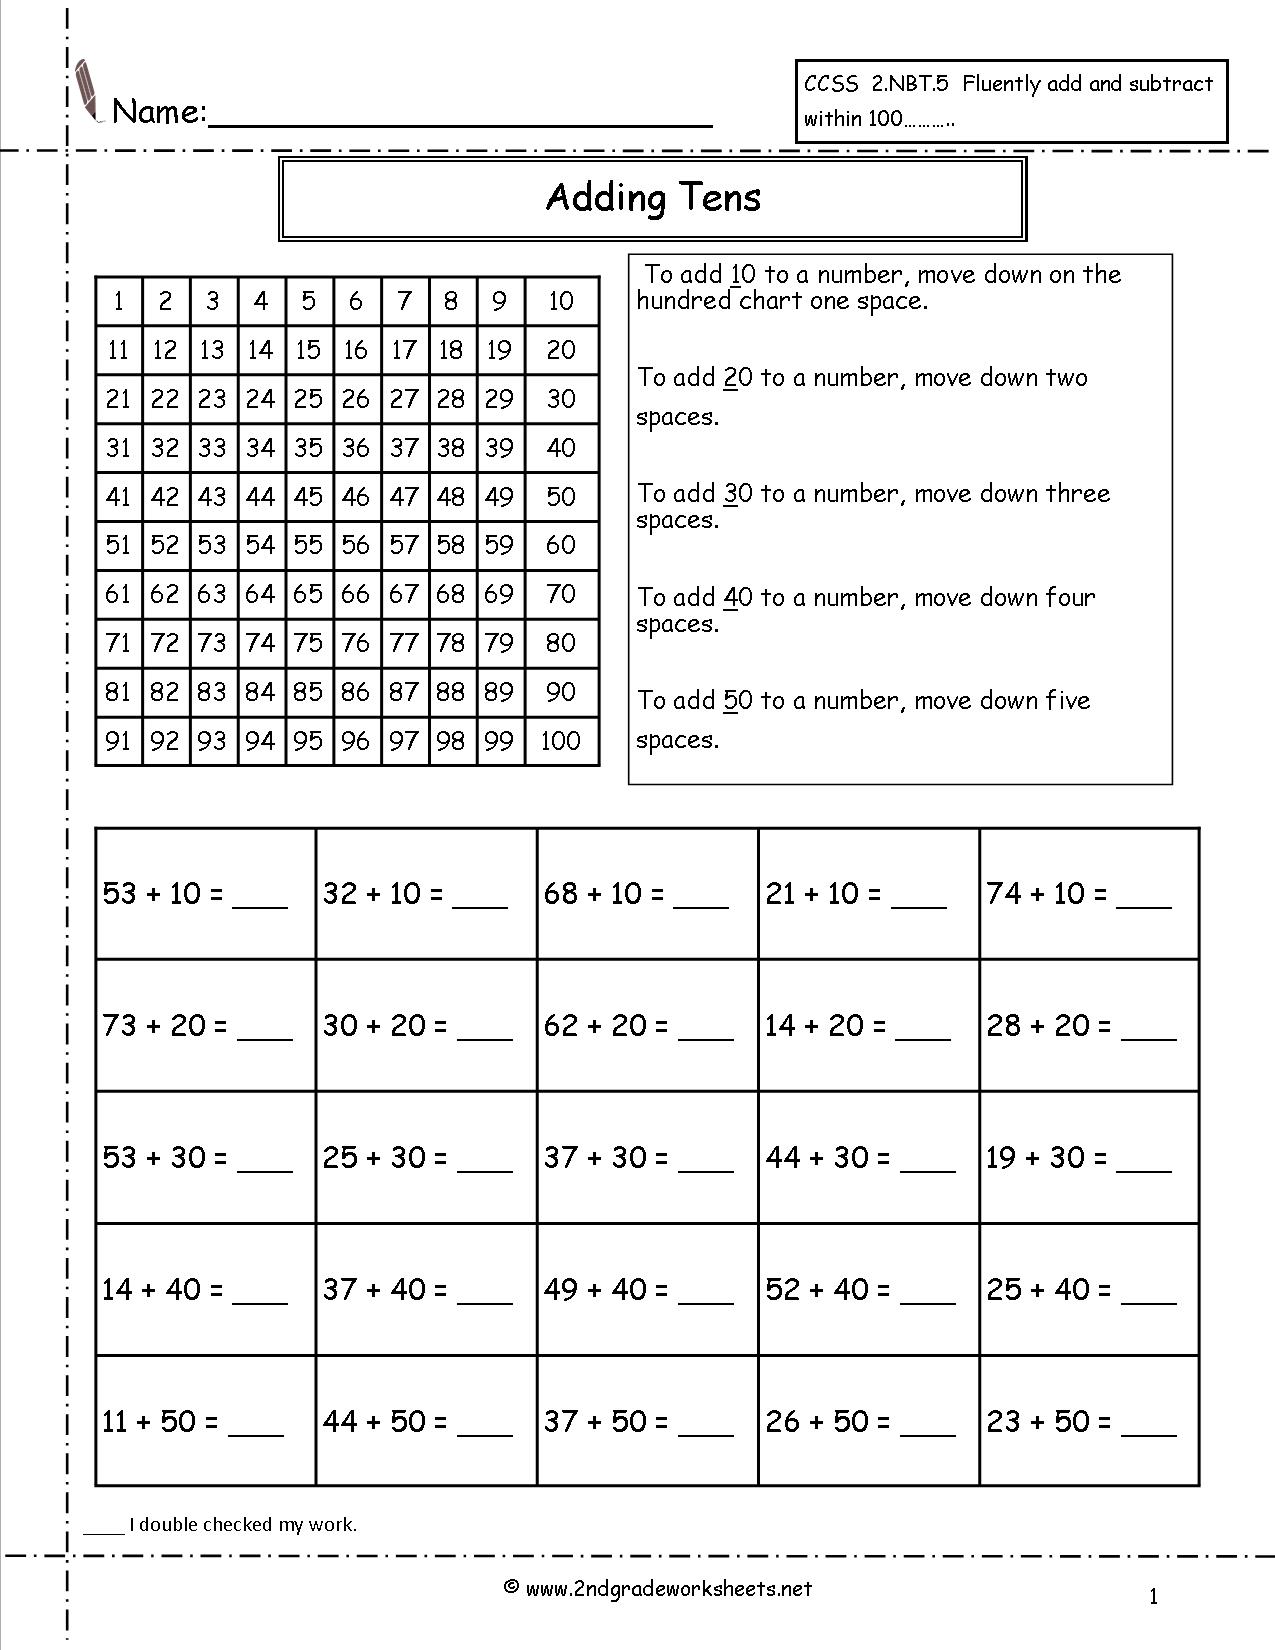 Video Adding Two Digit Numbers with Tens and Ones Worksheet Image